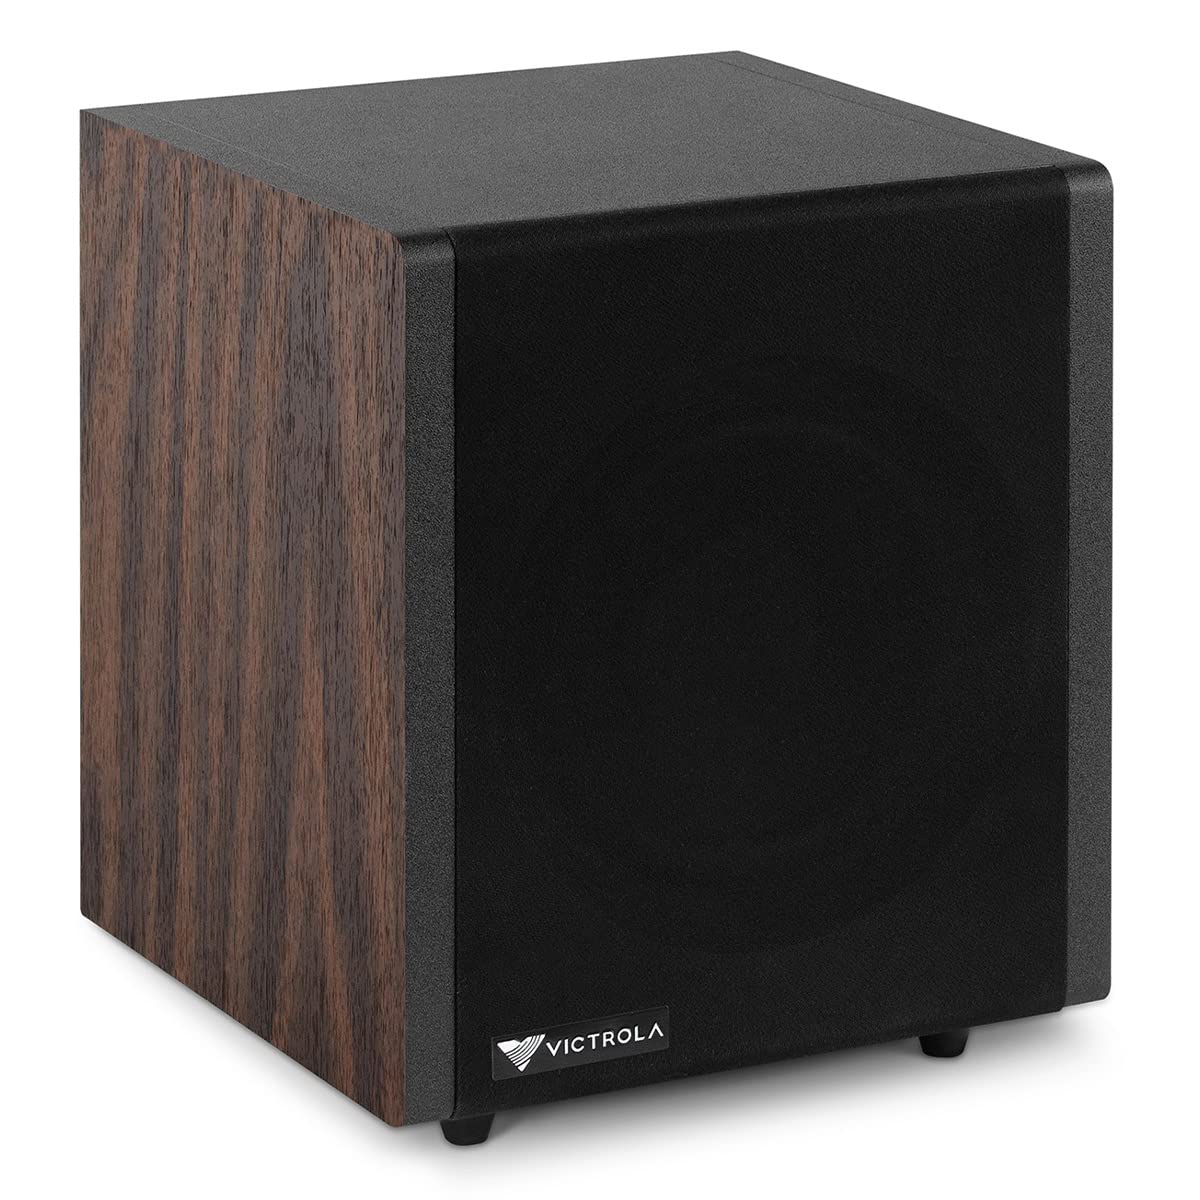 Victrola Premiere S1 Powered Subwoofer, 6.5" Front-Firing Woofer, 6.5" Passive Radiator & 70W Built-In Amplifier, Wireless Subwoofer with Bluetooth 5.0, Works with Premiere V1 Soundbar Turntable